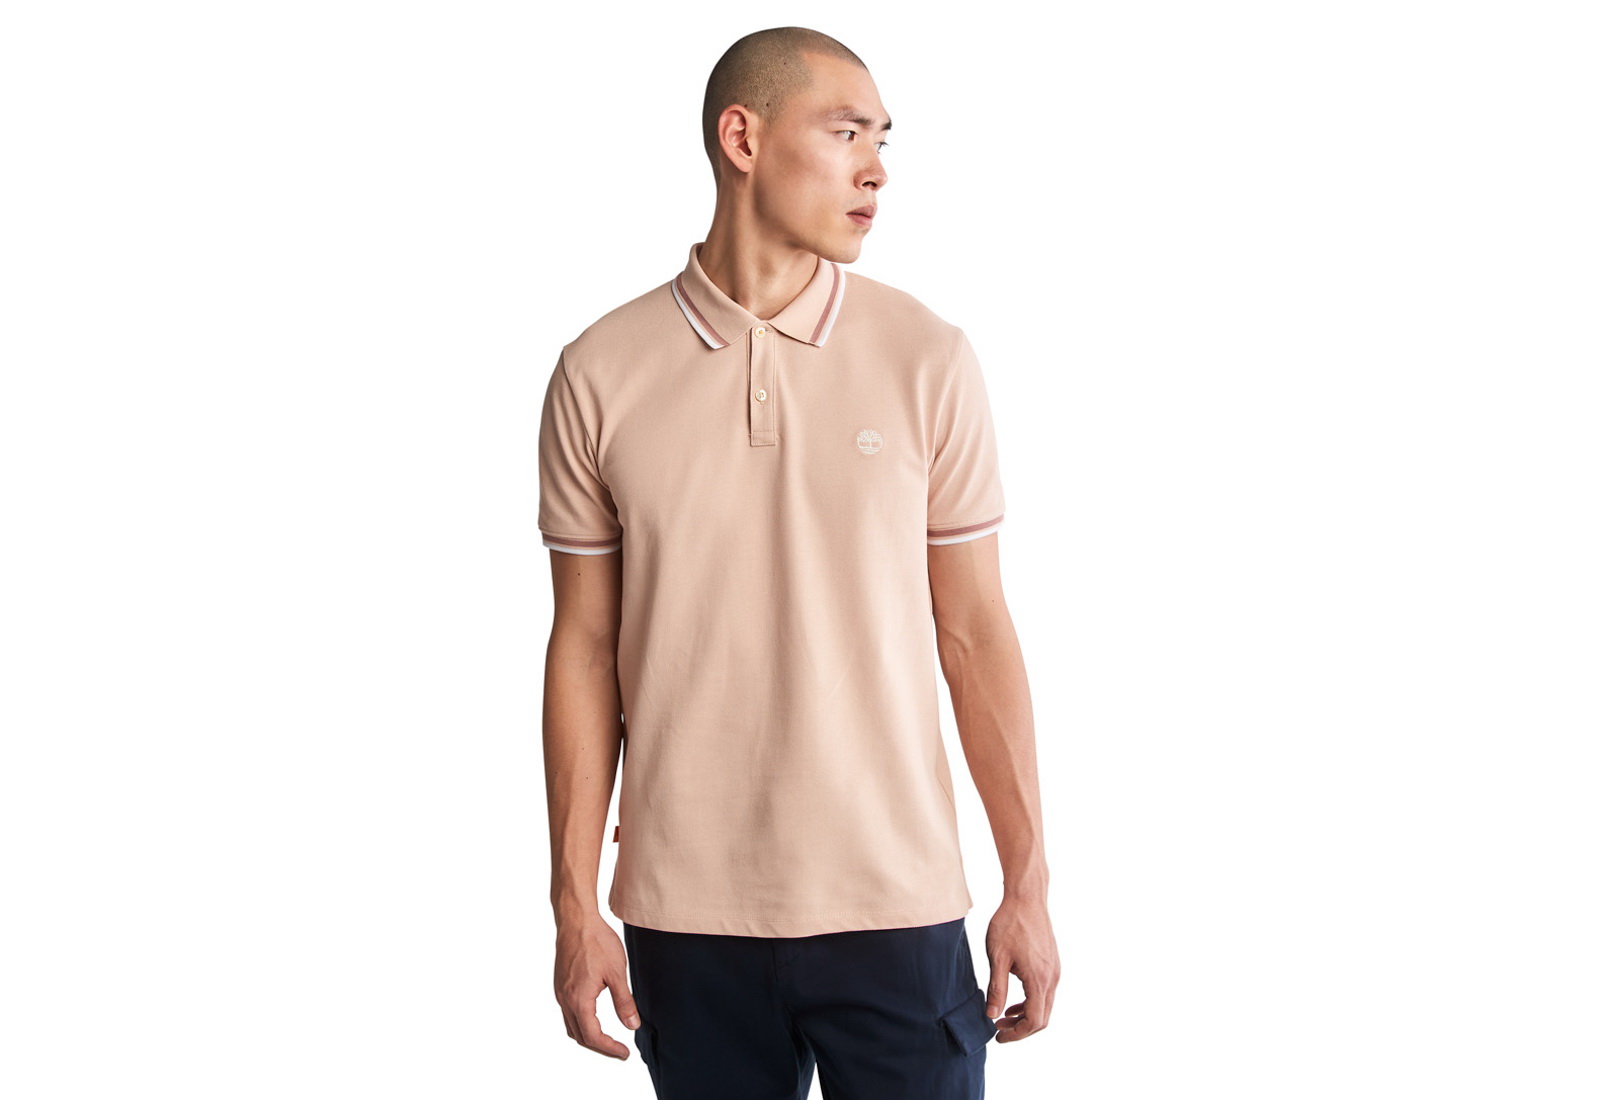 Timberland Haine Ss Tipped Polo